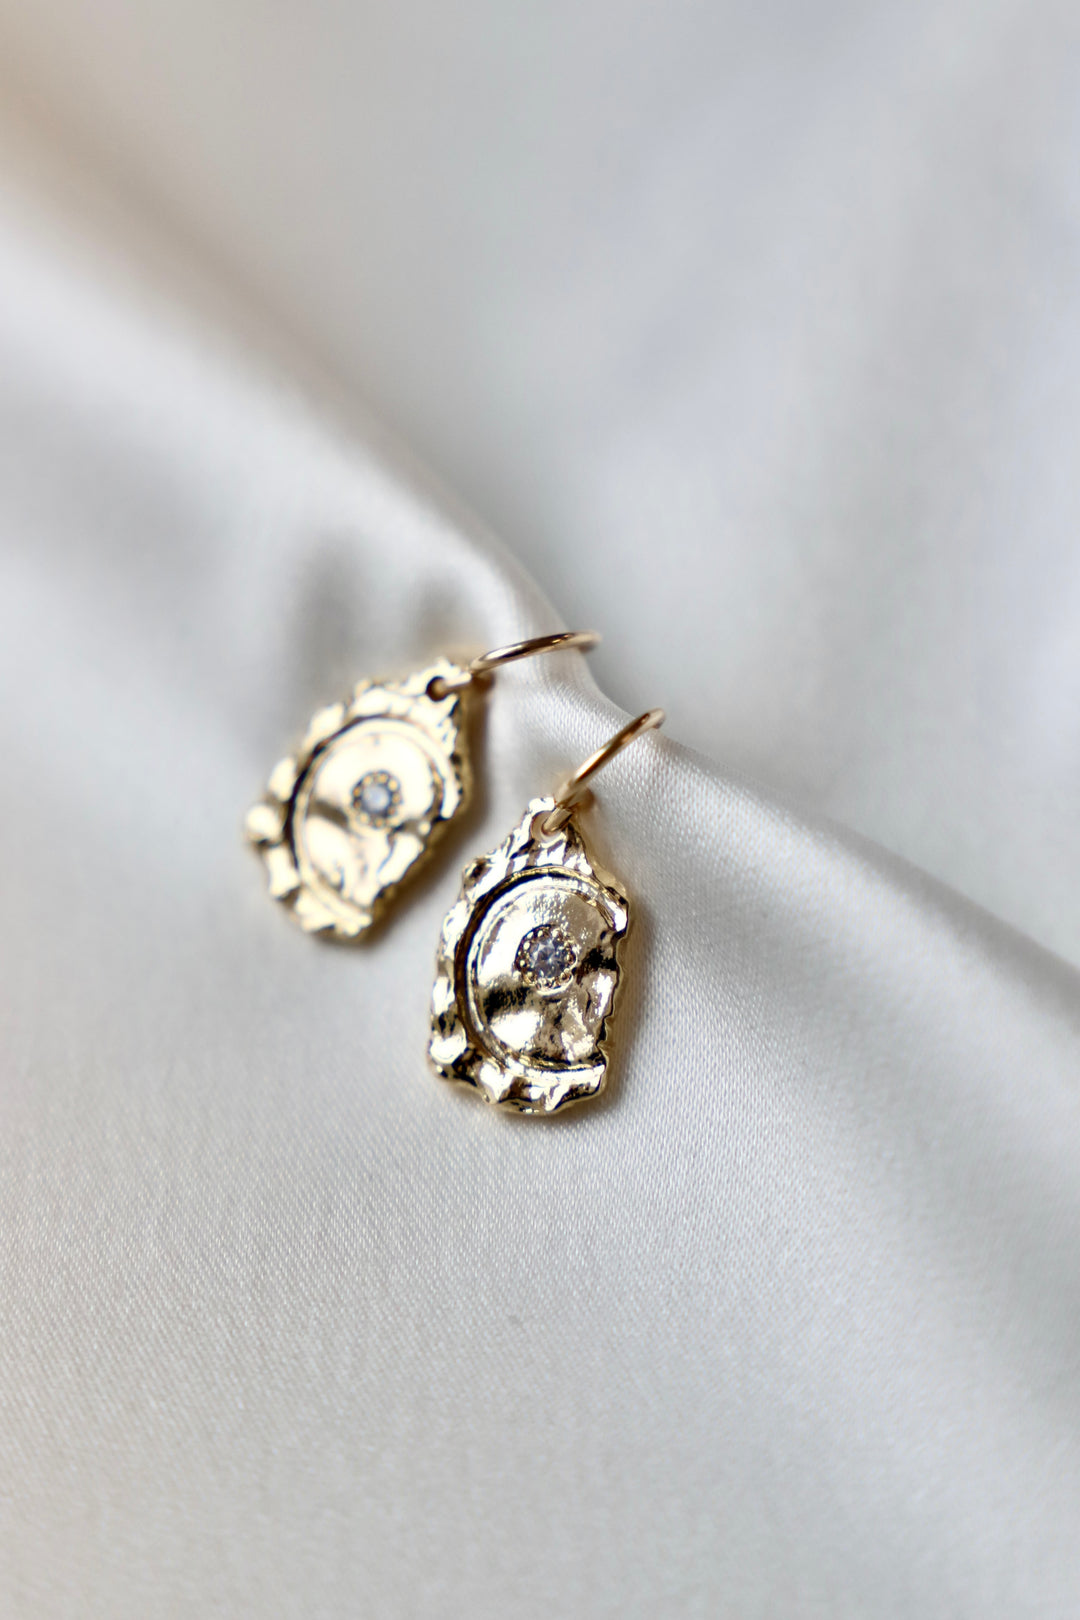 MEDALLION STAMP AND CZ EARRINGS